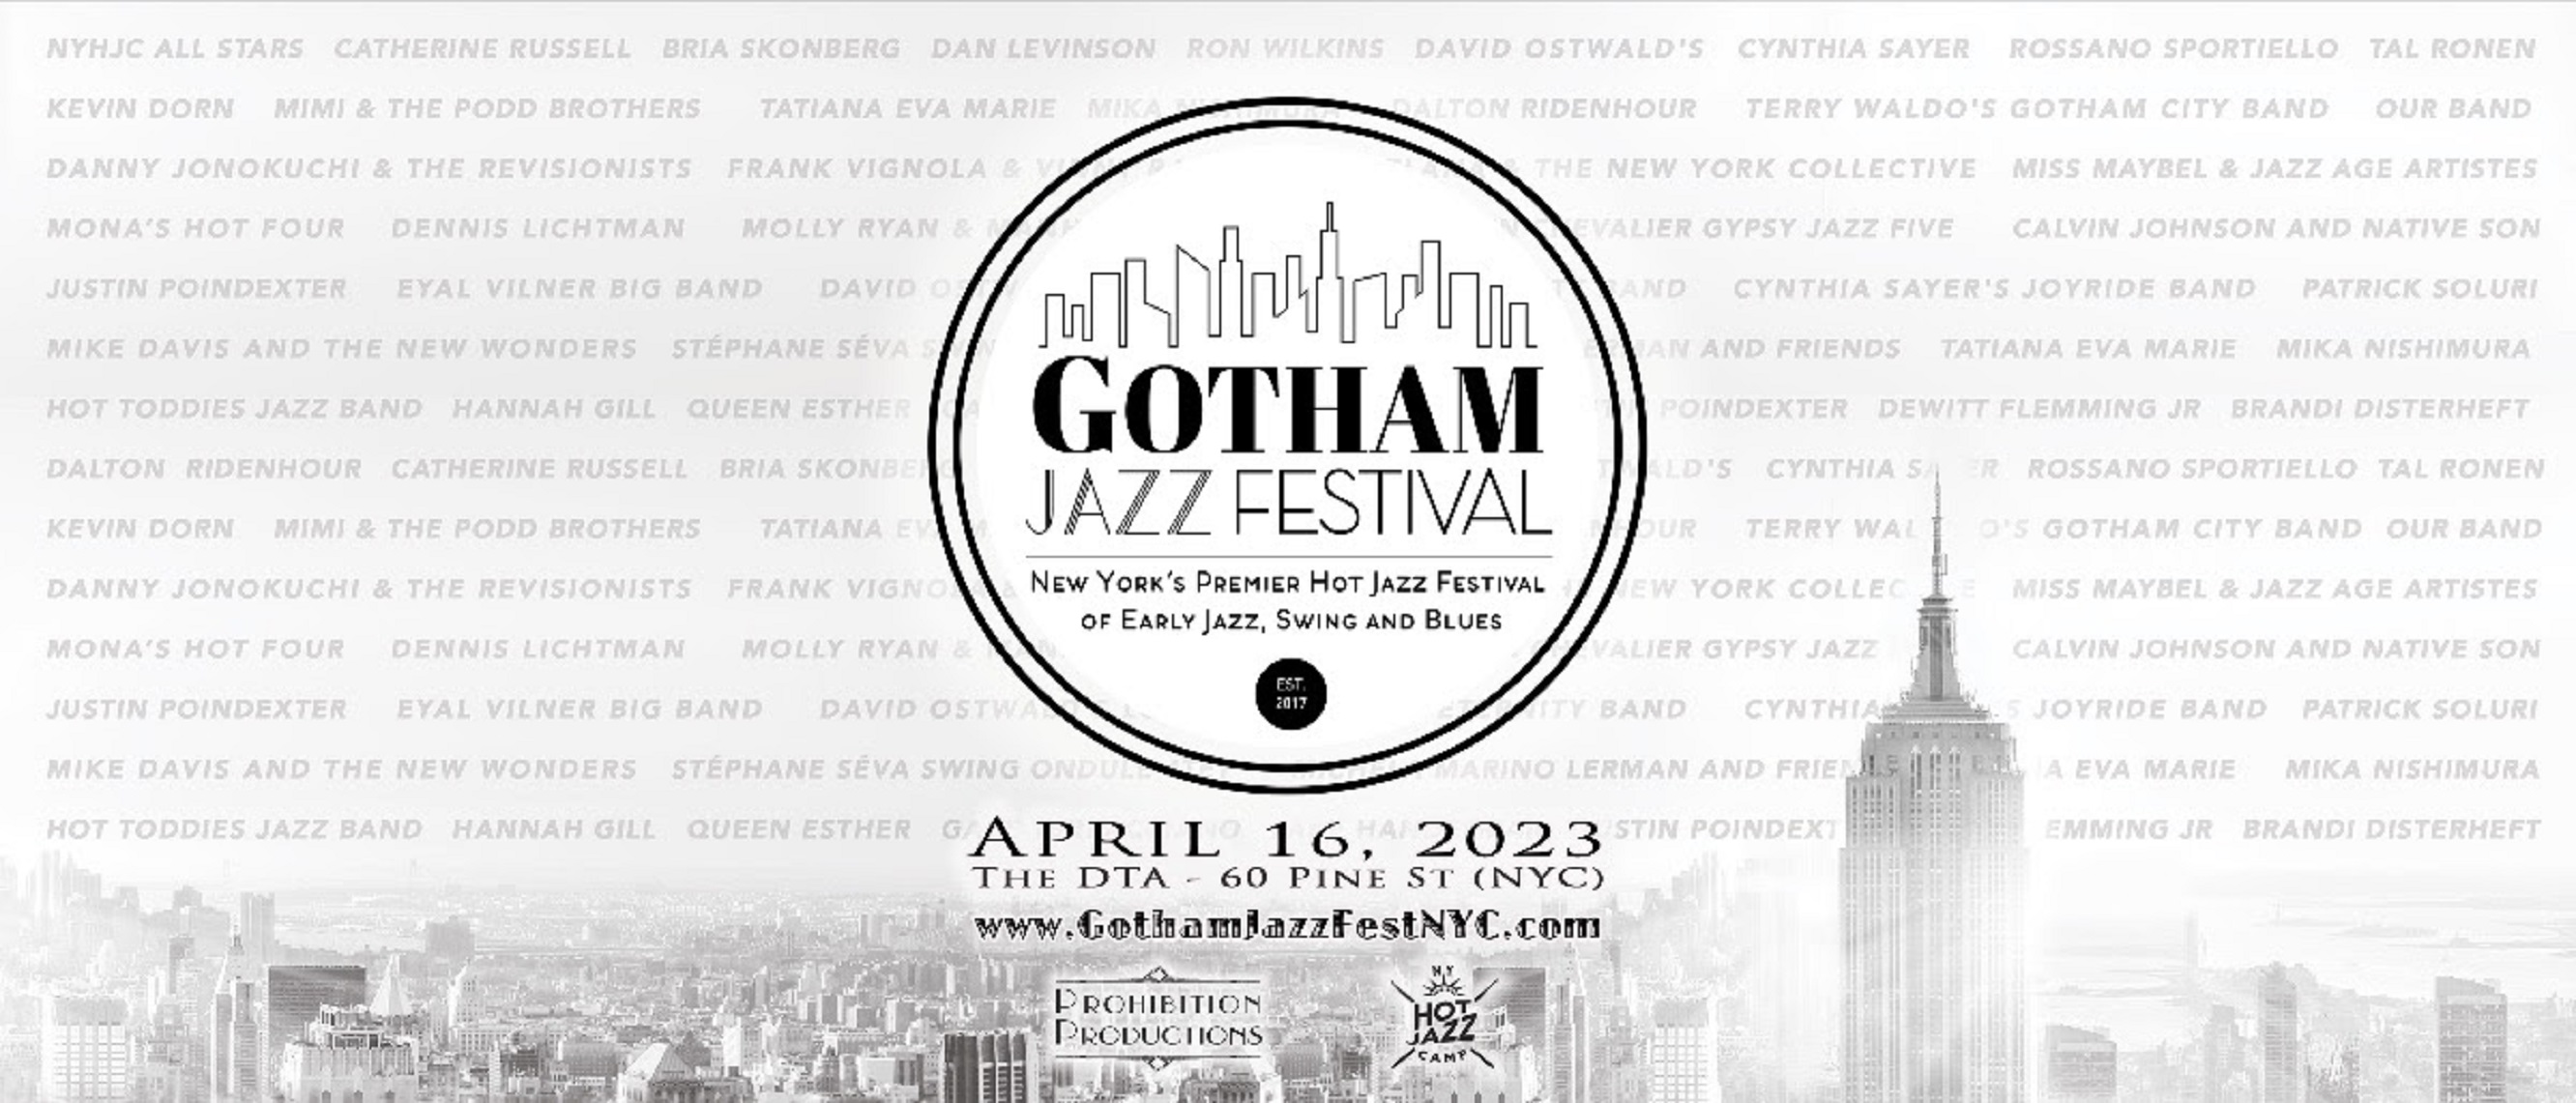 GOTHAM JAZZ FESTIVAL is this Sunday, April 16th; NY's premier Festival of Early Jazz, Swing & Blues - over 100 musicians!